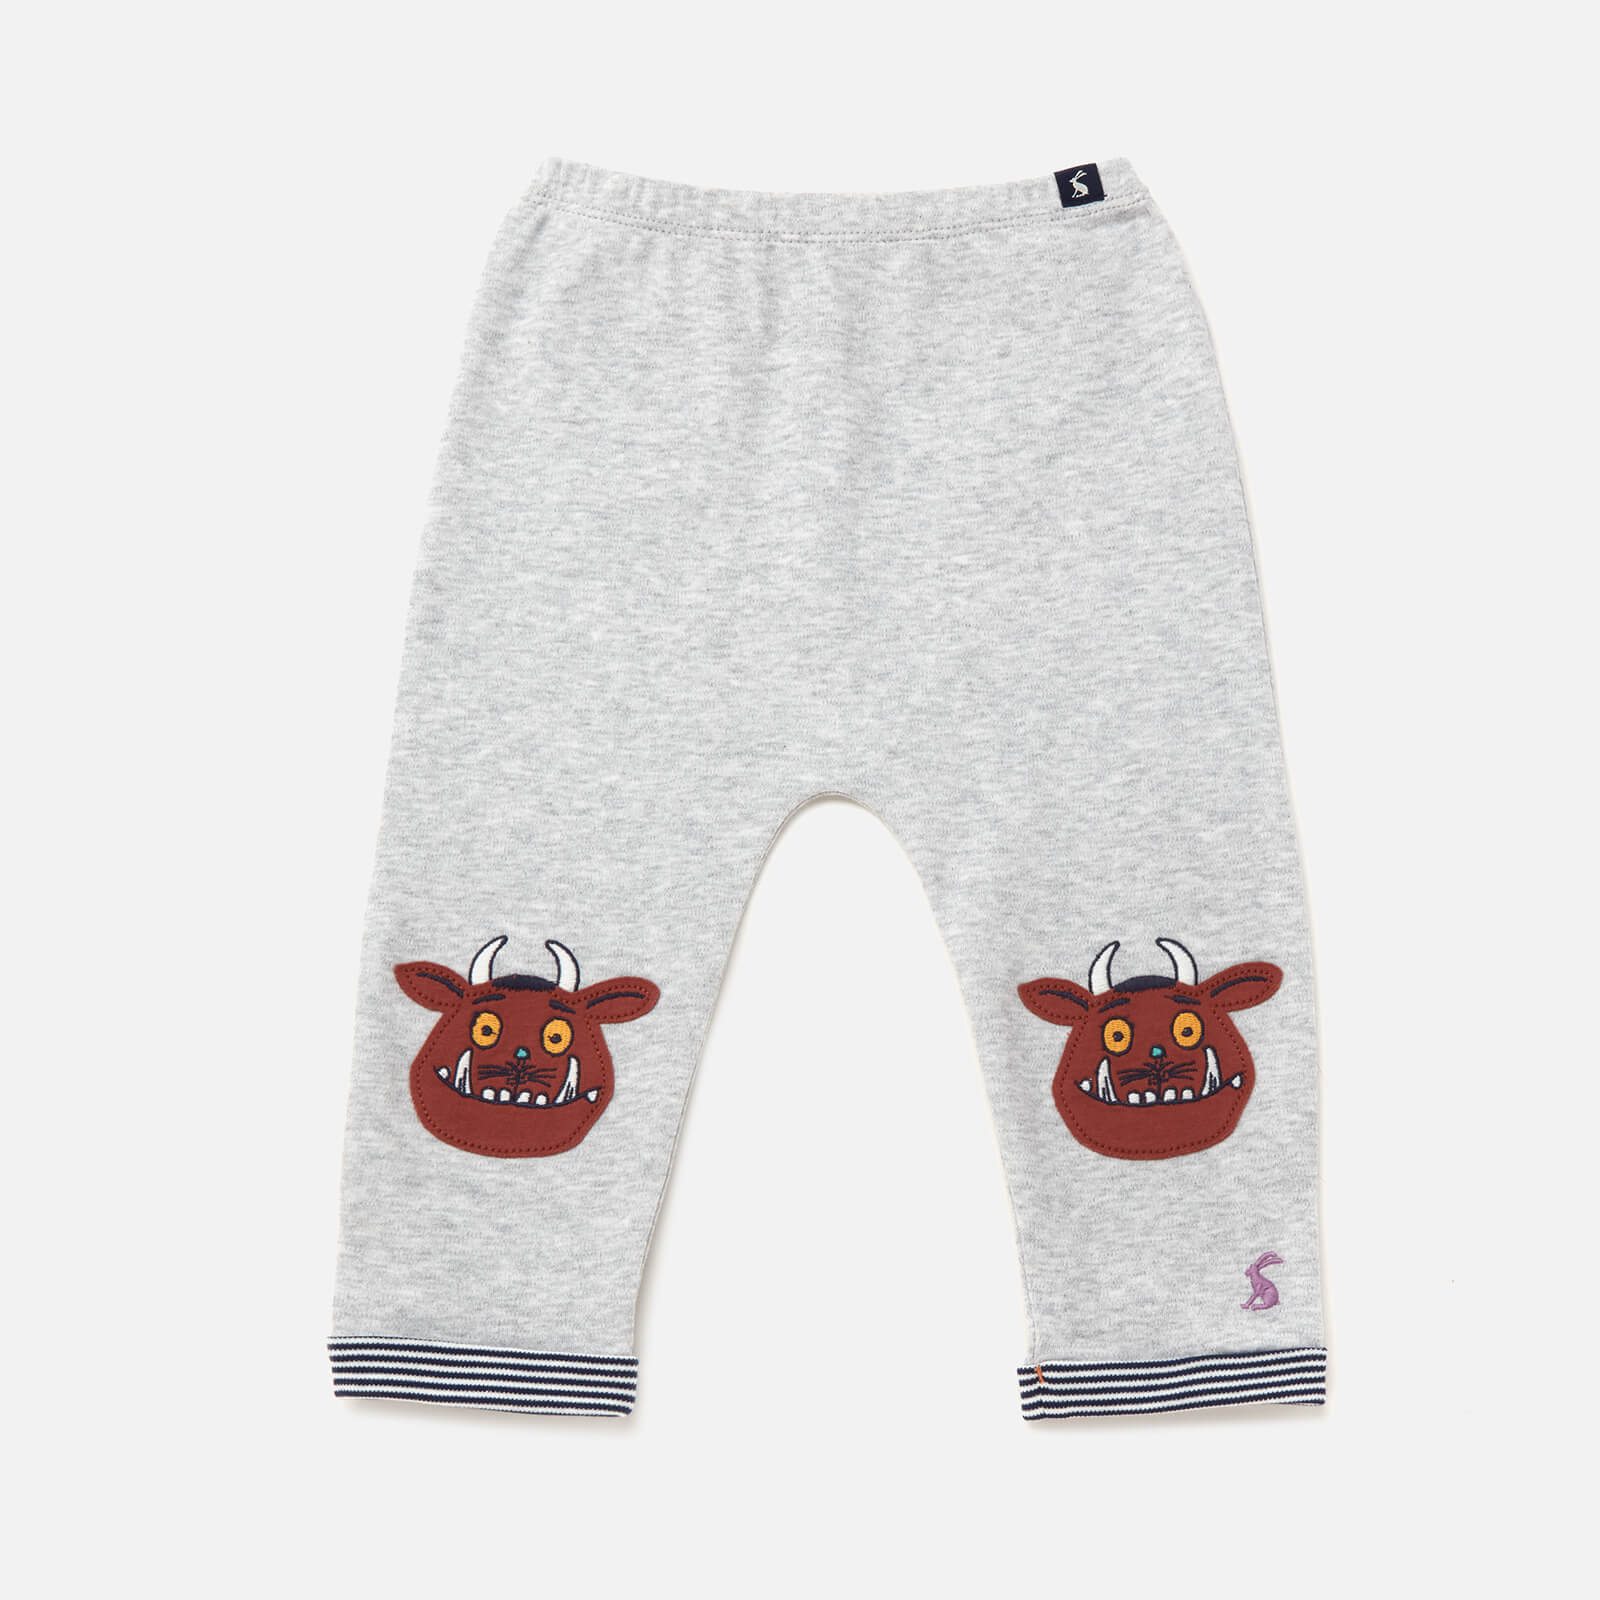 Joules Babys' Gruffalo Joggers - Grey - 3-6 months